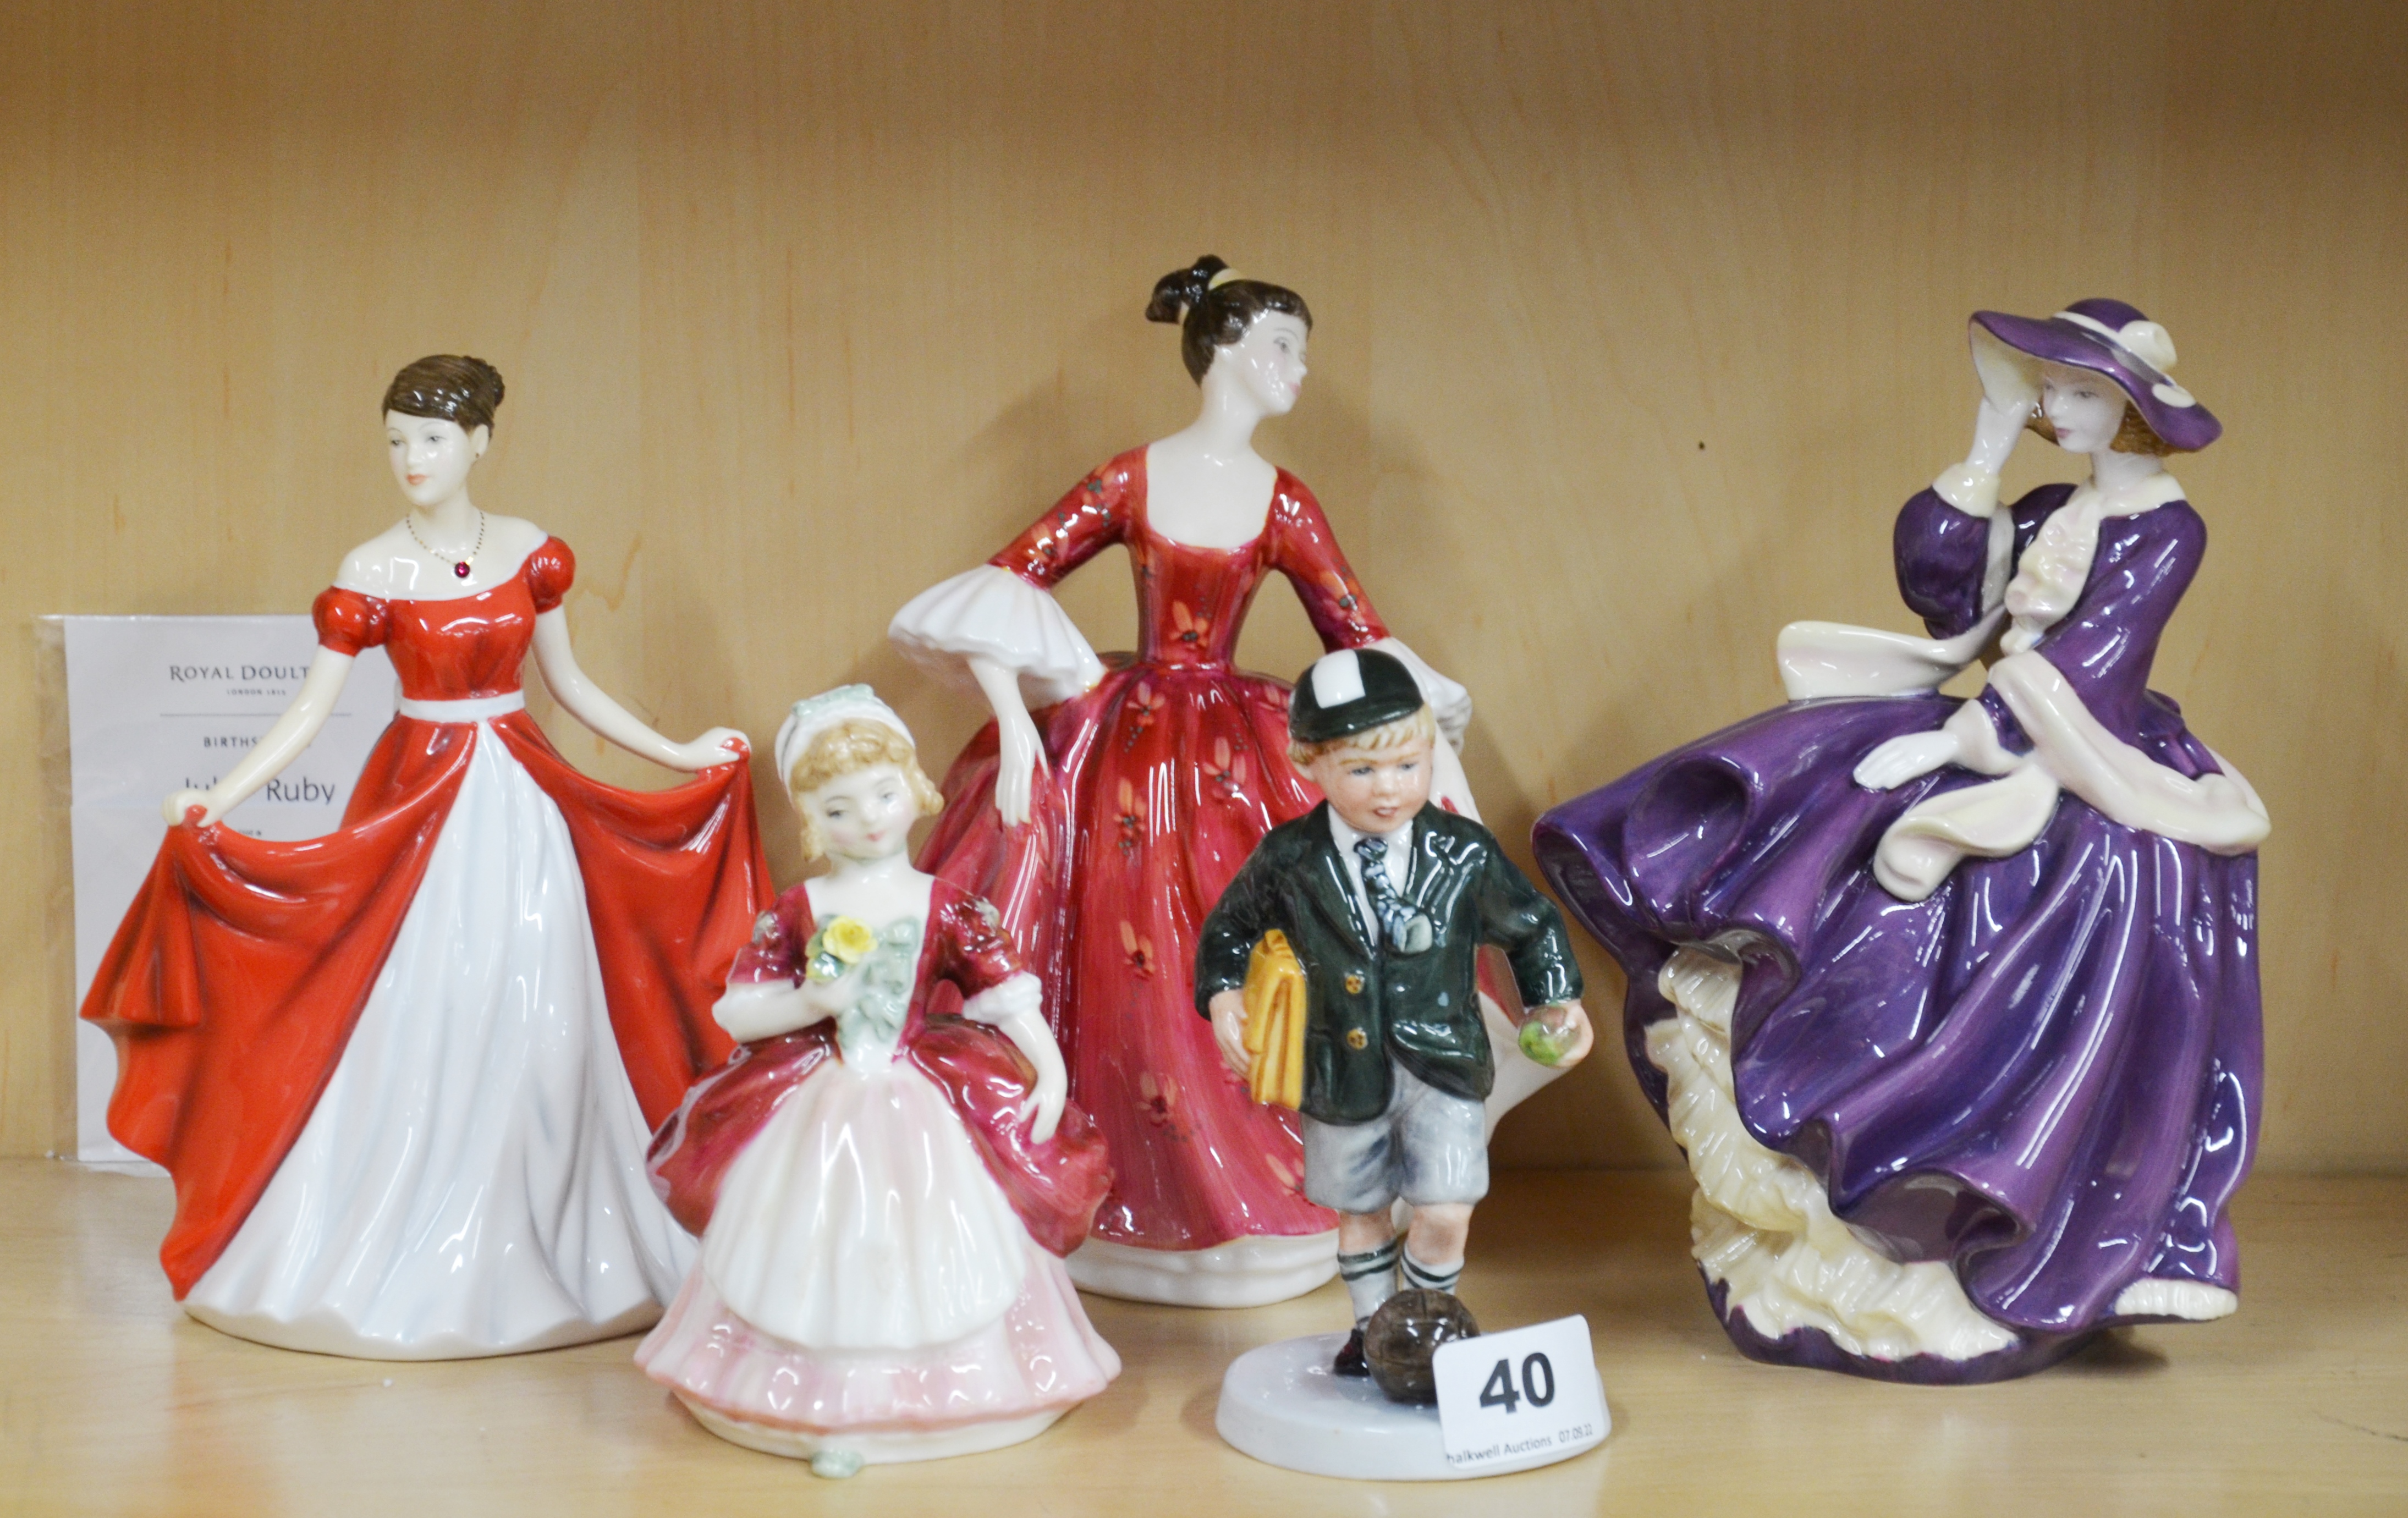 Is Royal Doulton Worth Anything?